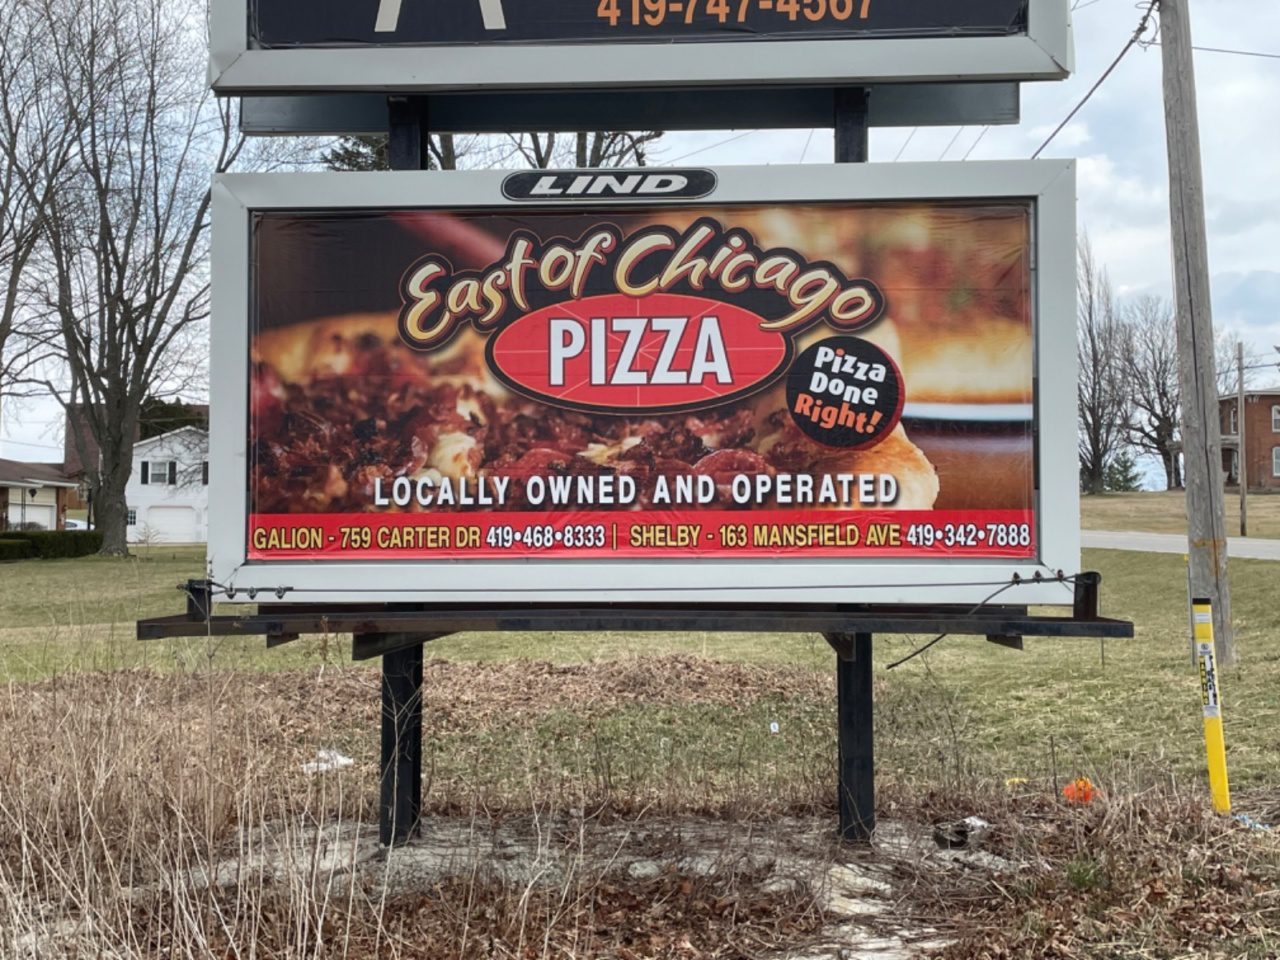 East of Chicago, east of chicago billboard, pizza background